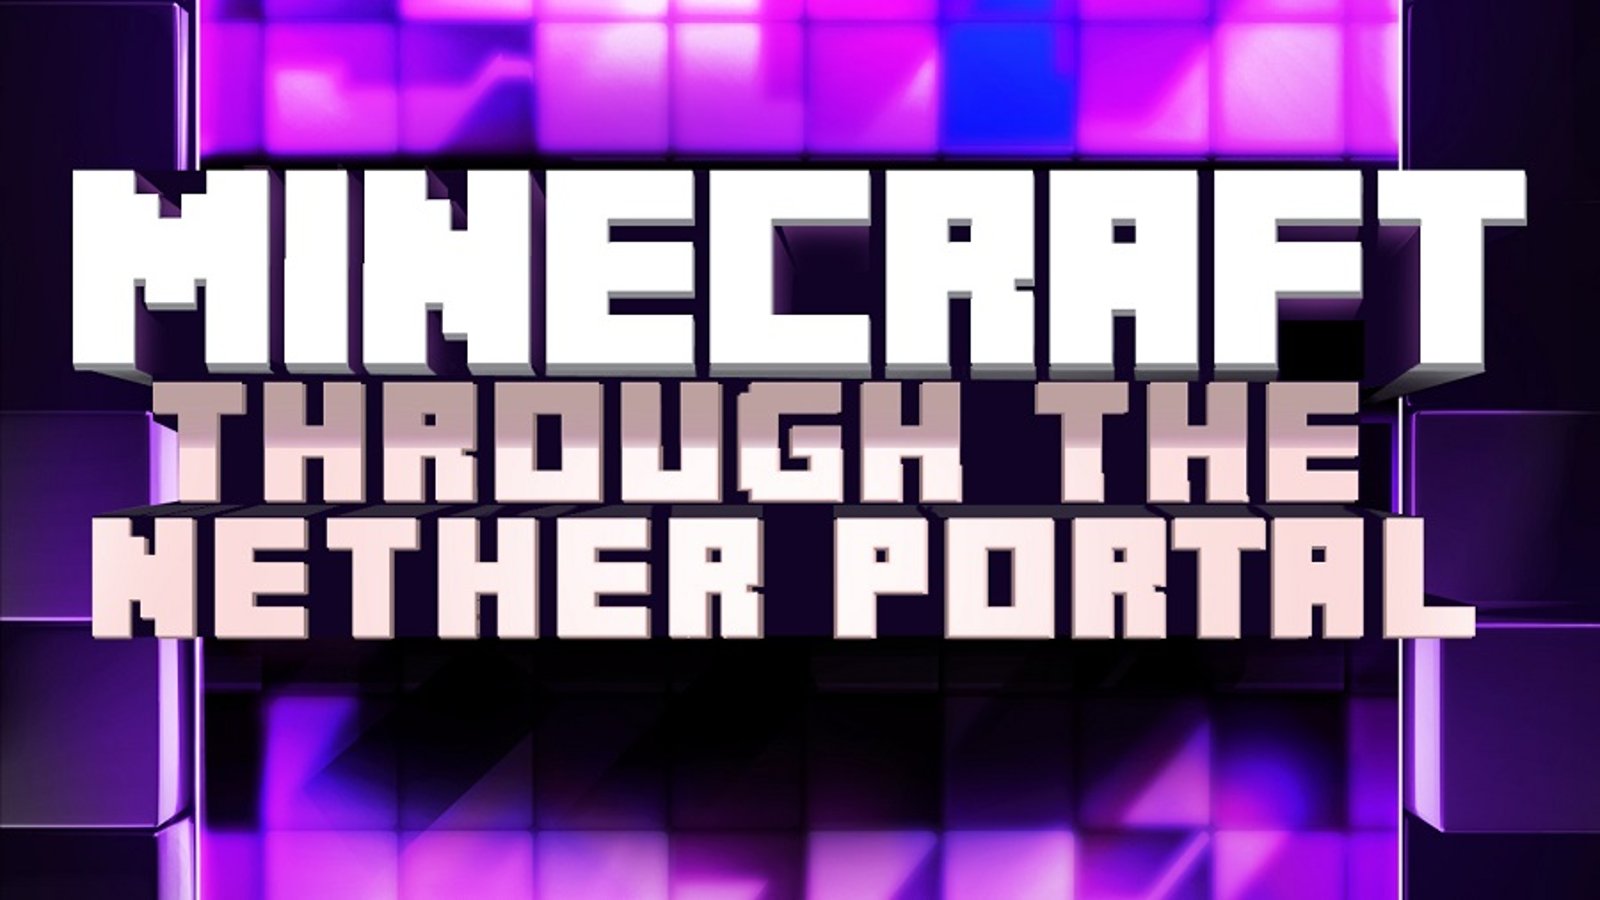 Minecraft: Through the Nether Portal - An Examination of the Popular Video Game